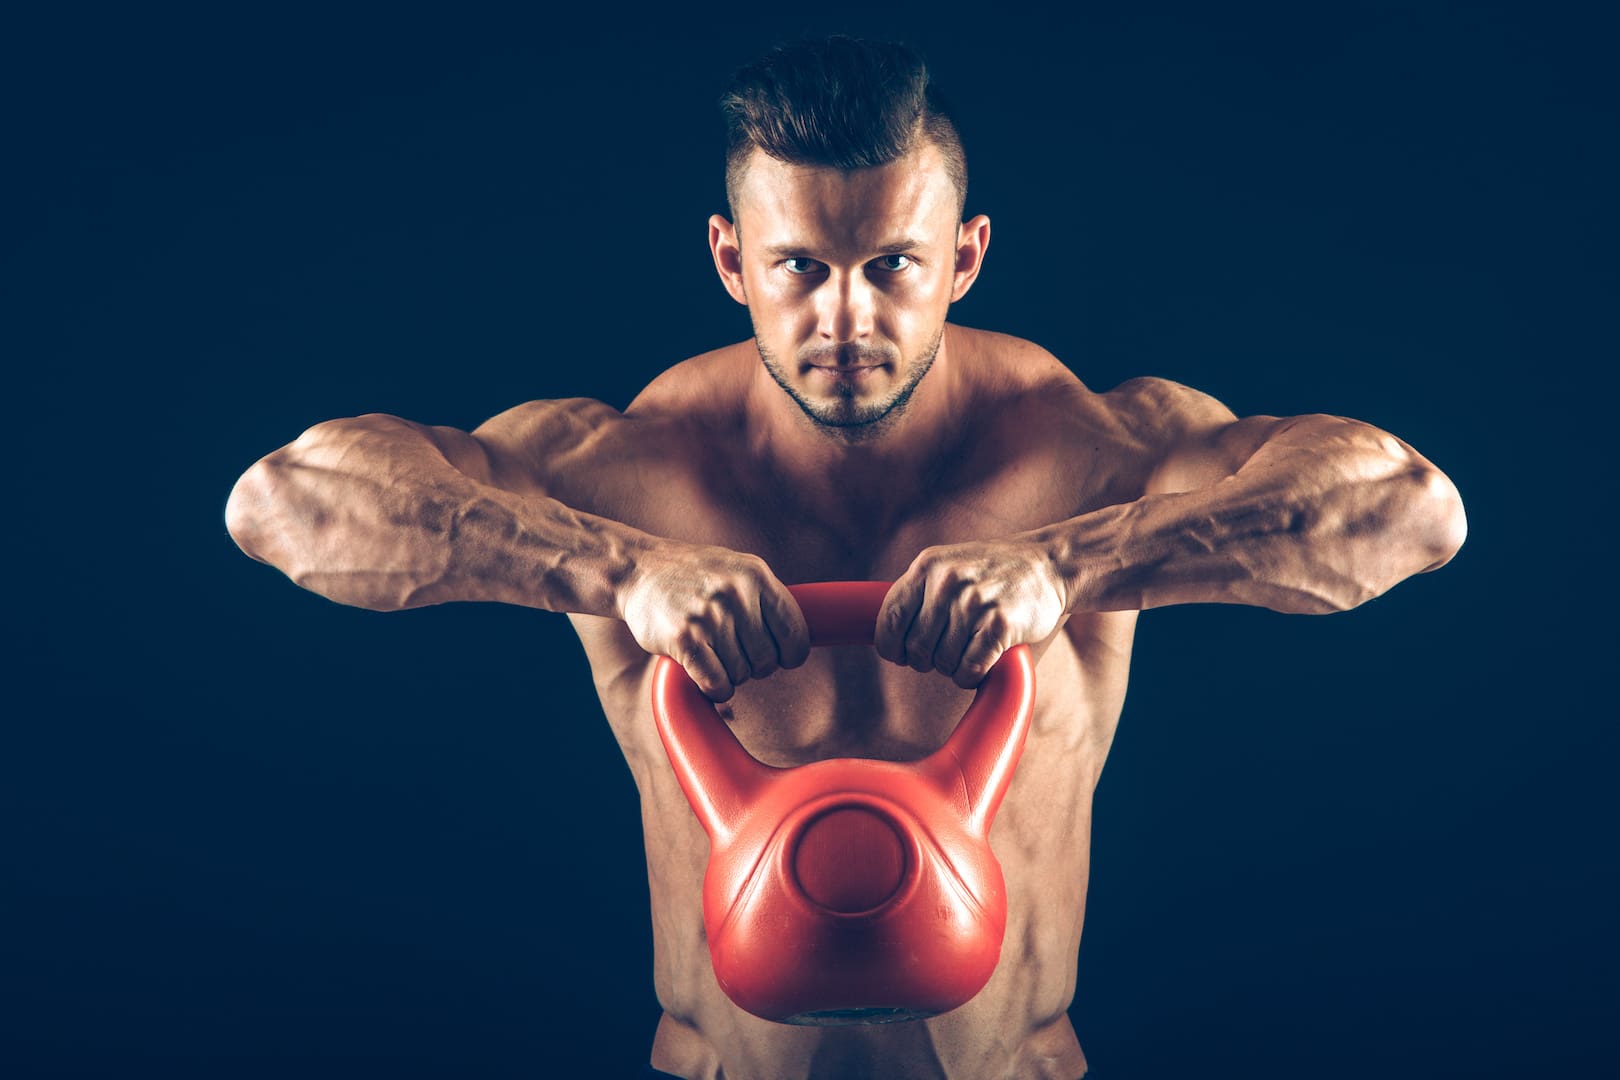 30 Minute Kettlebell workout results for Burn Fat fast